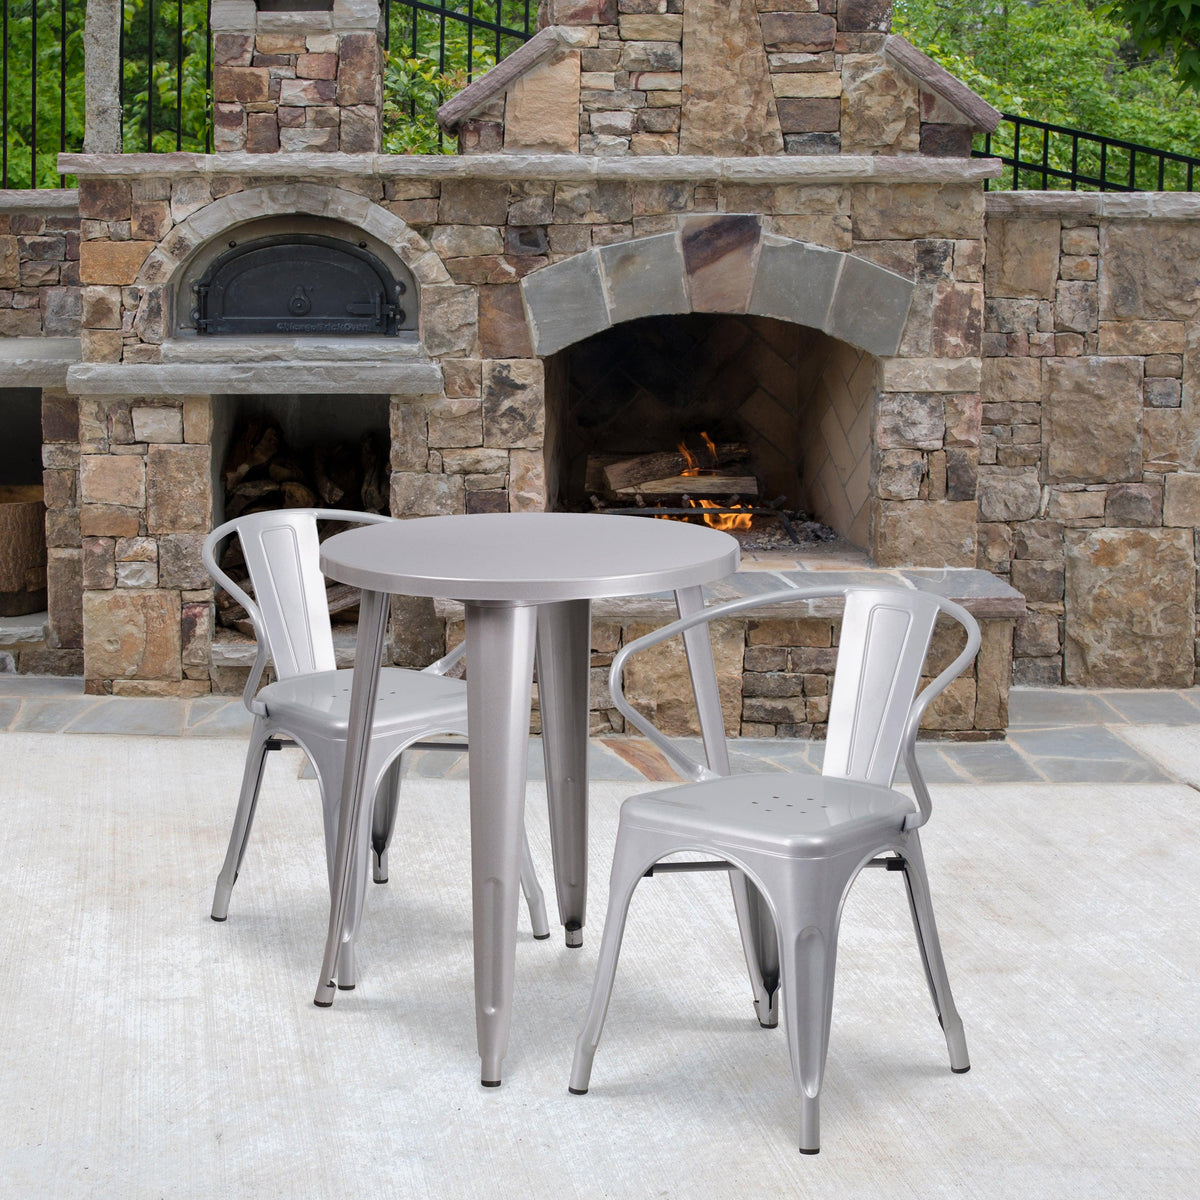 Silver |#| 24inch Round Silver Metal Indoor-Outdoor Table Set with 2 Arm Chairs - Patio Set